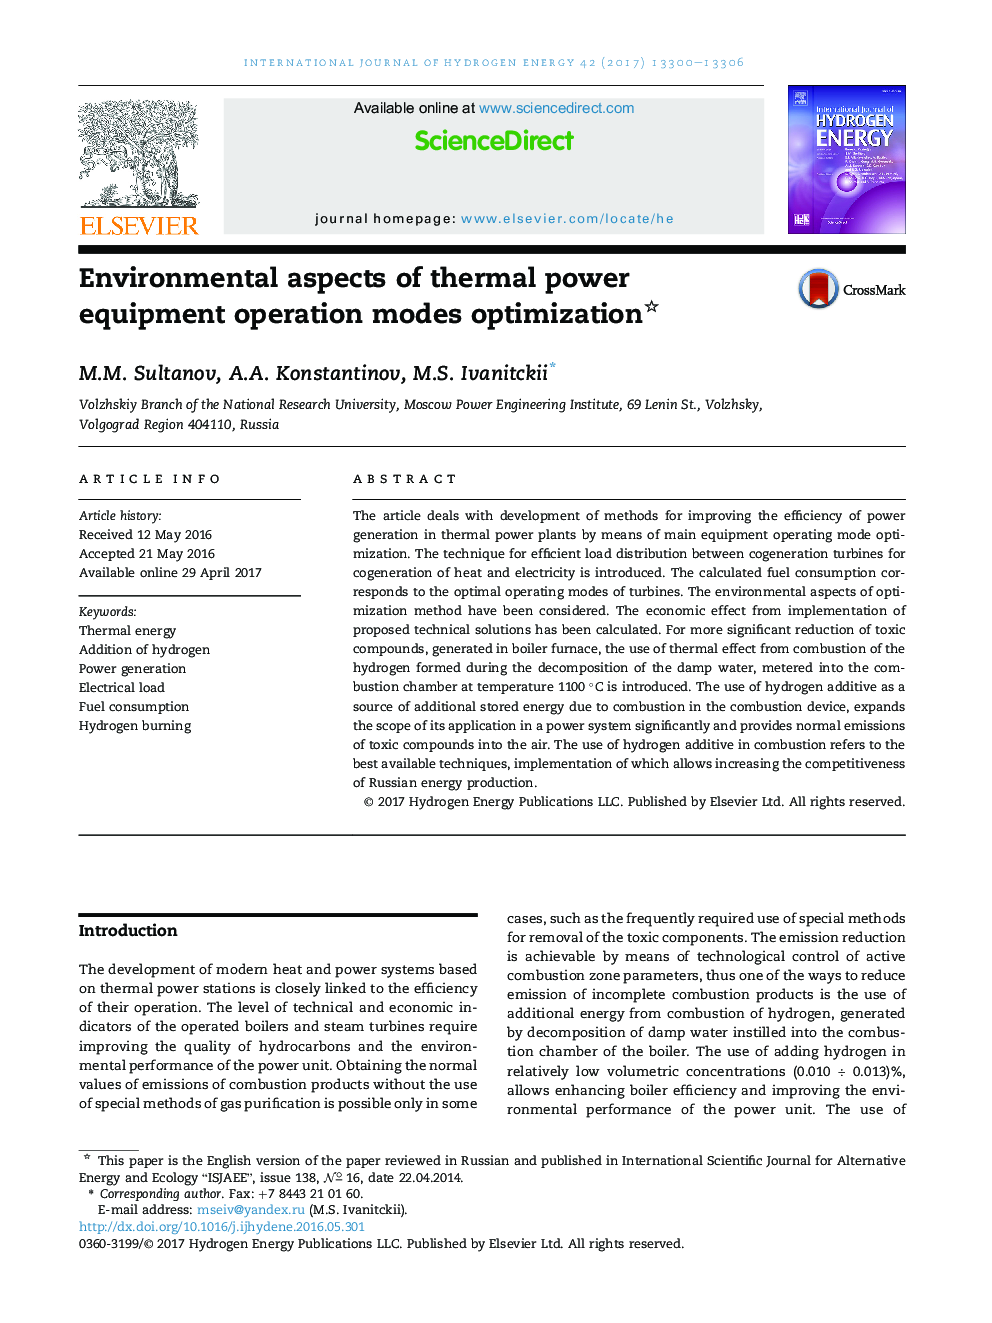 Environmental aspects of thermal power equipment operation modes optimization